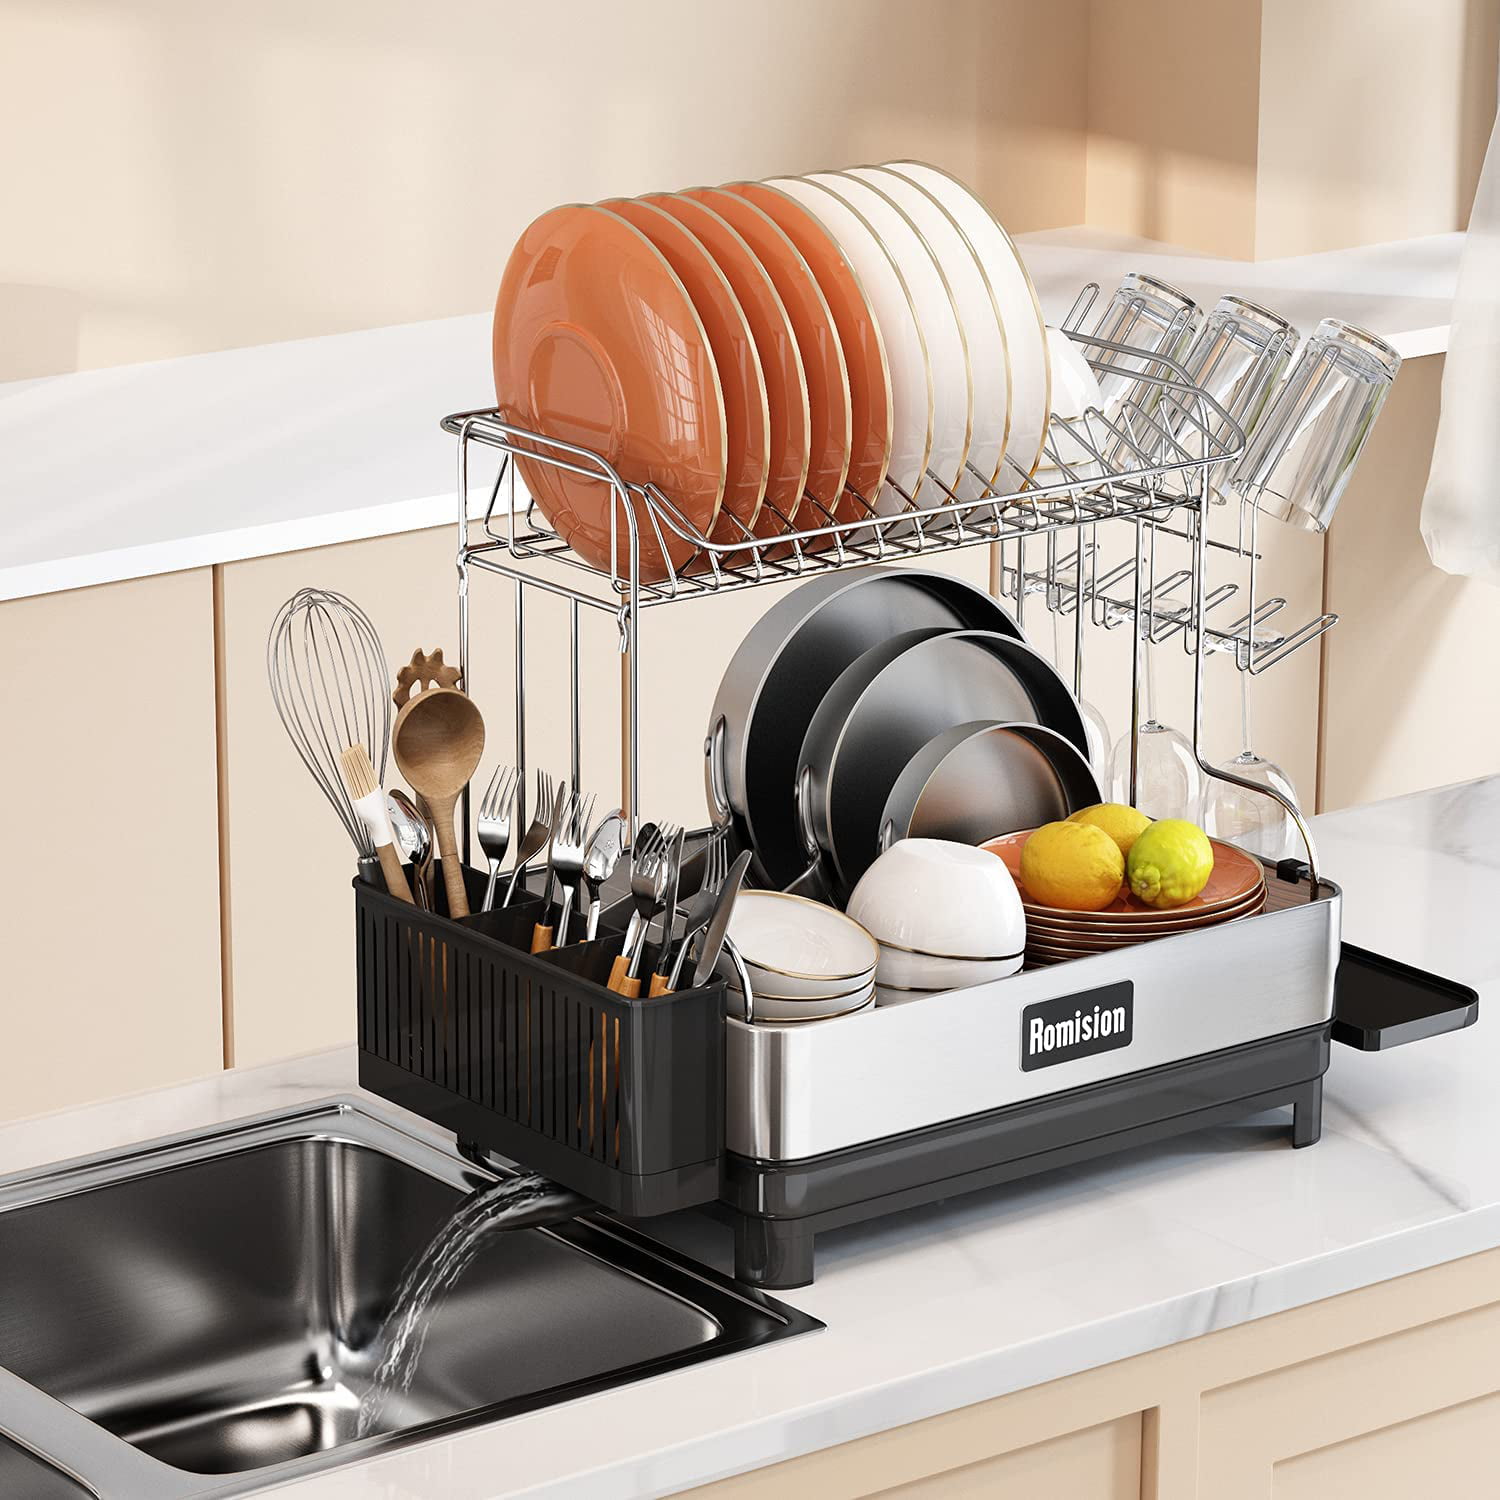 romision Dish Drying Rack and Drainboard Set, 2 Tier Large Stainless Steel  Sink Organizer Dish Racks with Cups Holder, Utensil H - AliExpress